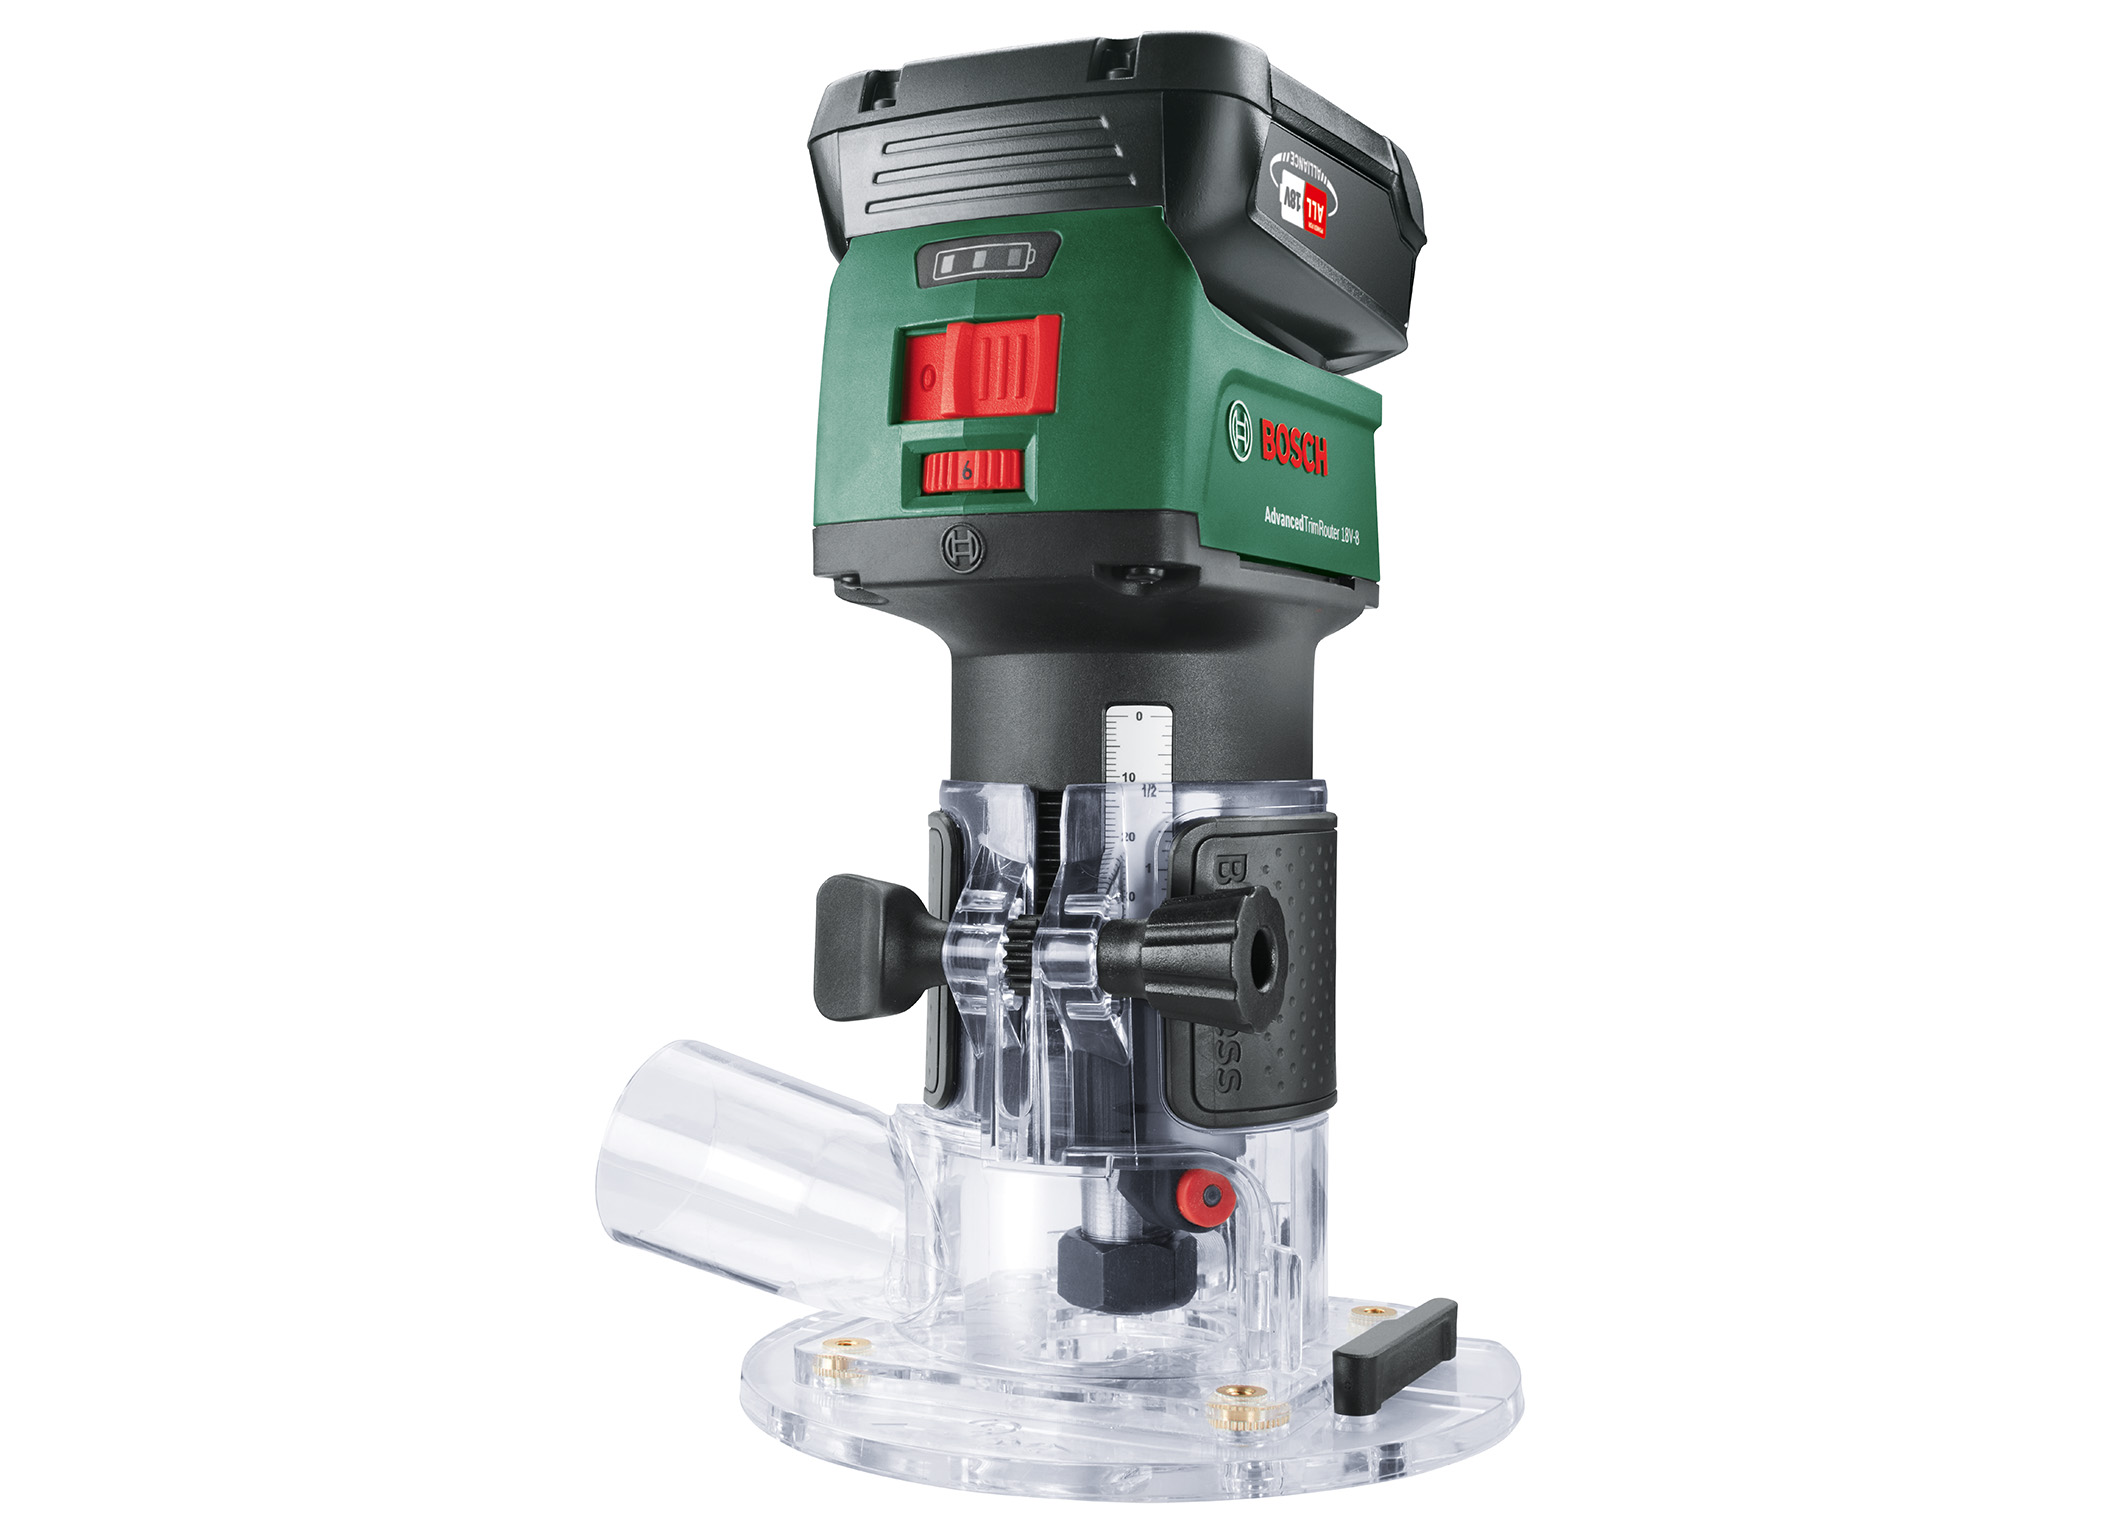 Strong addition in the ‘18V Power for All System’: First cordless trim router from Bosch for DIYers